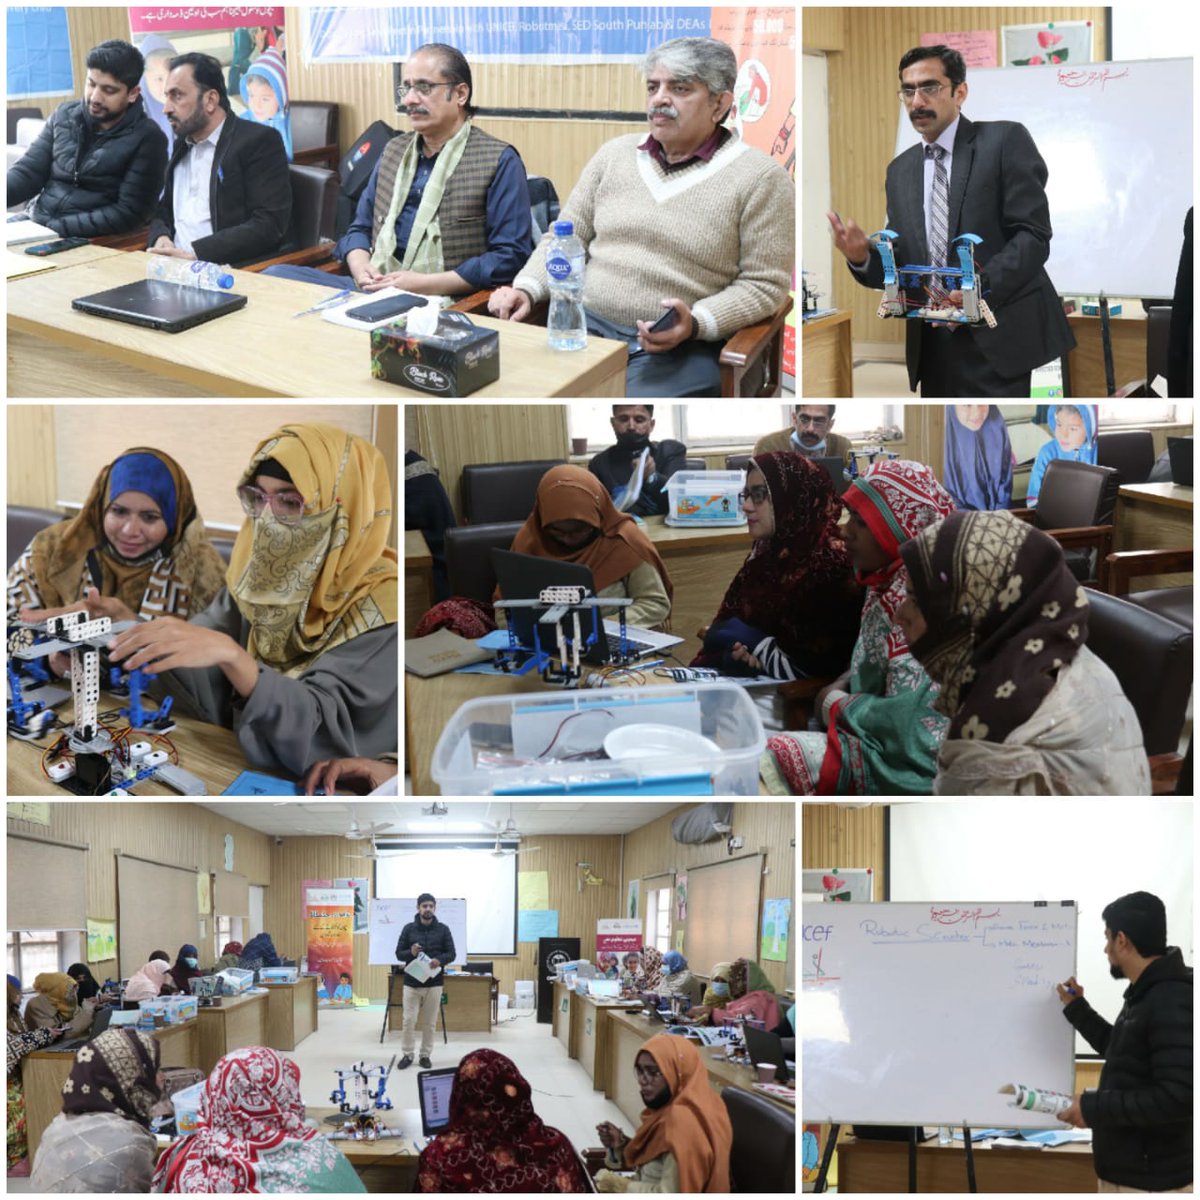 The Robotmea-UNICEF-SPO teacher training in D.G. Khan, concluded successfully. Over 6 days, 23 educators frm ALP centers in DG Khan & Rajanpur, along with QAED, delved into an innovative STEAM and robotics curriculum. This collaboration aims to enhance education for grades 6 to 8